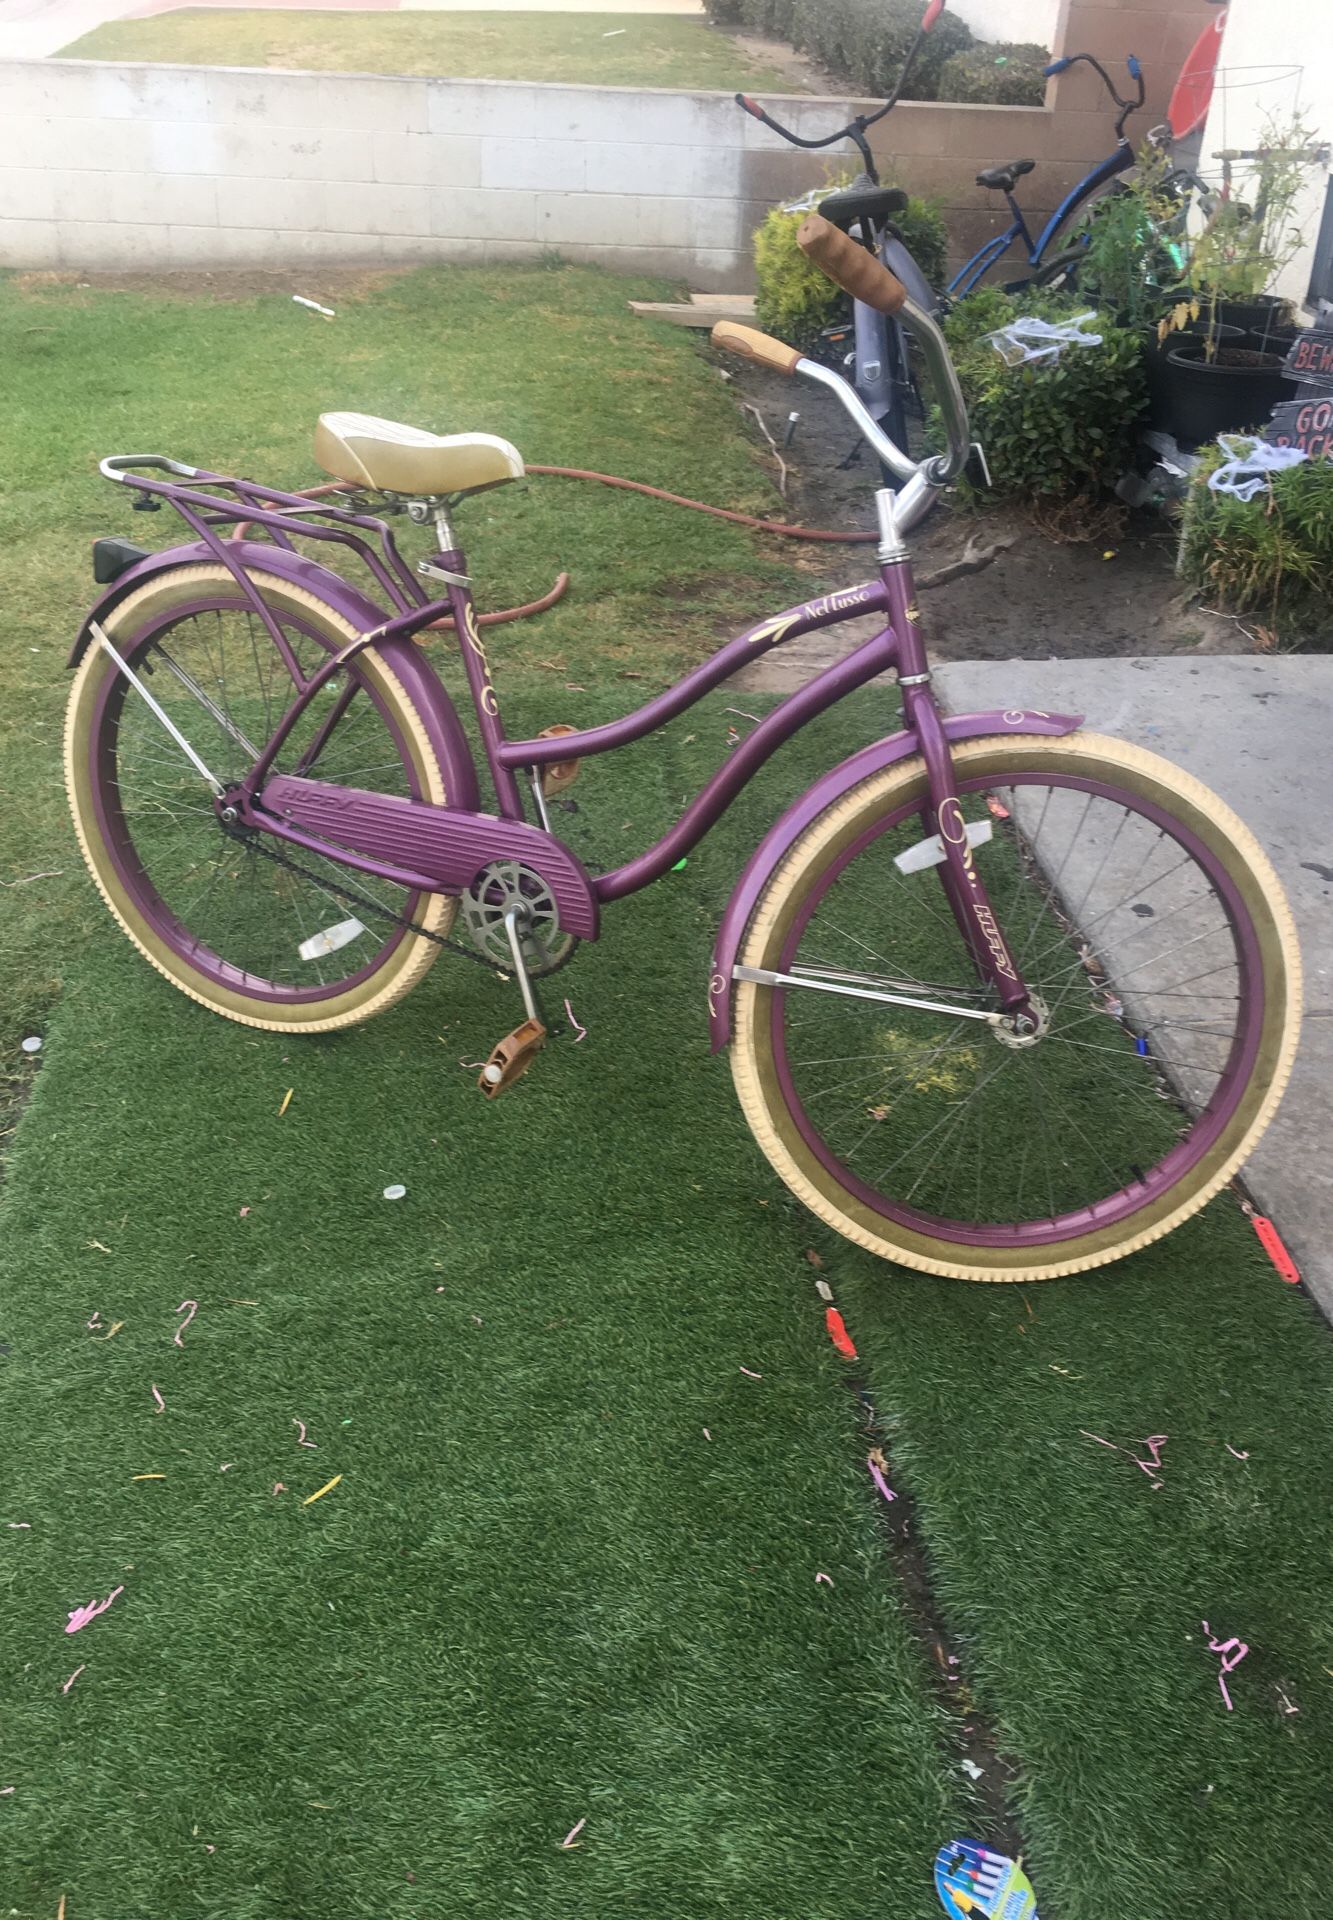 Huffy beach cruiser good condition ready to ride 26” with back rack